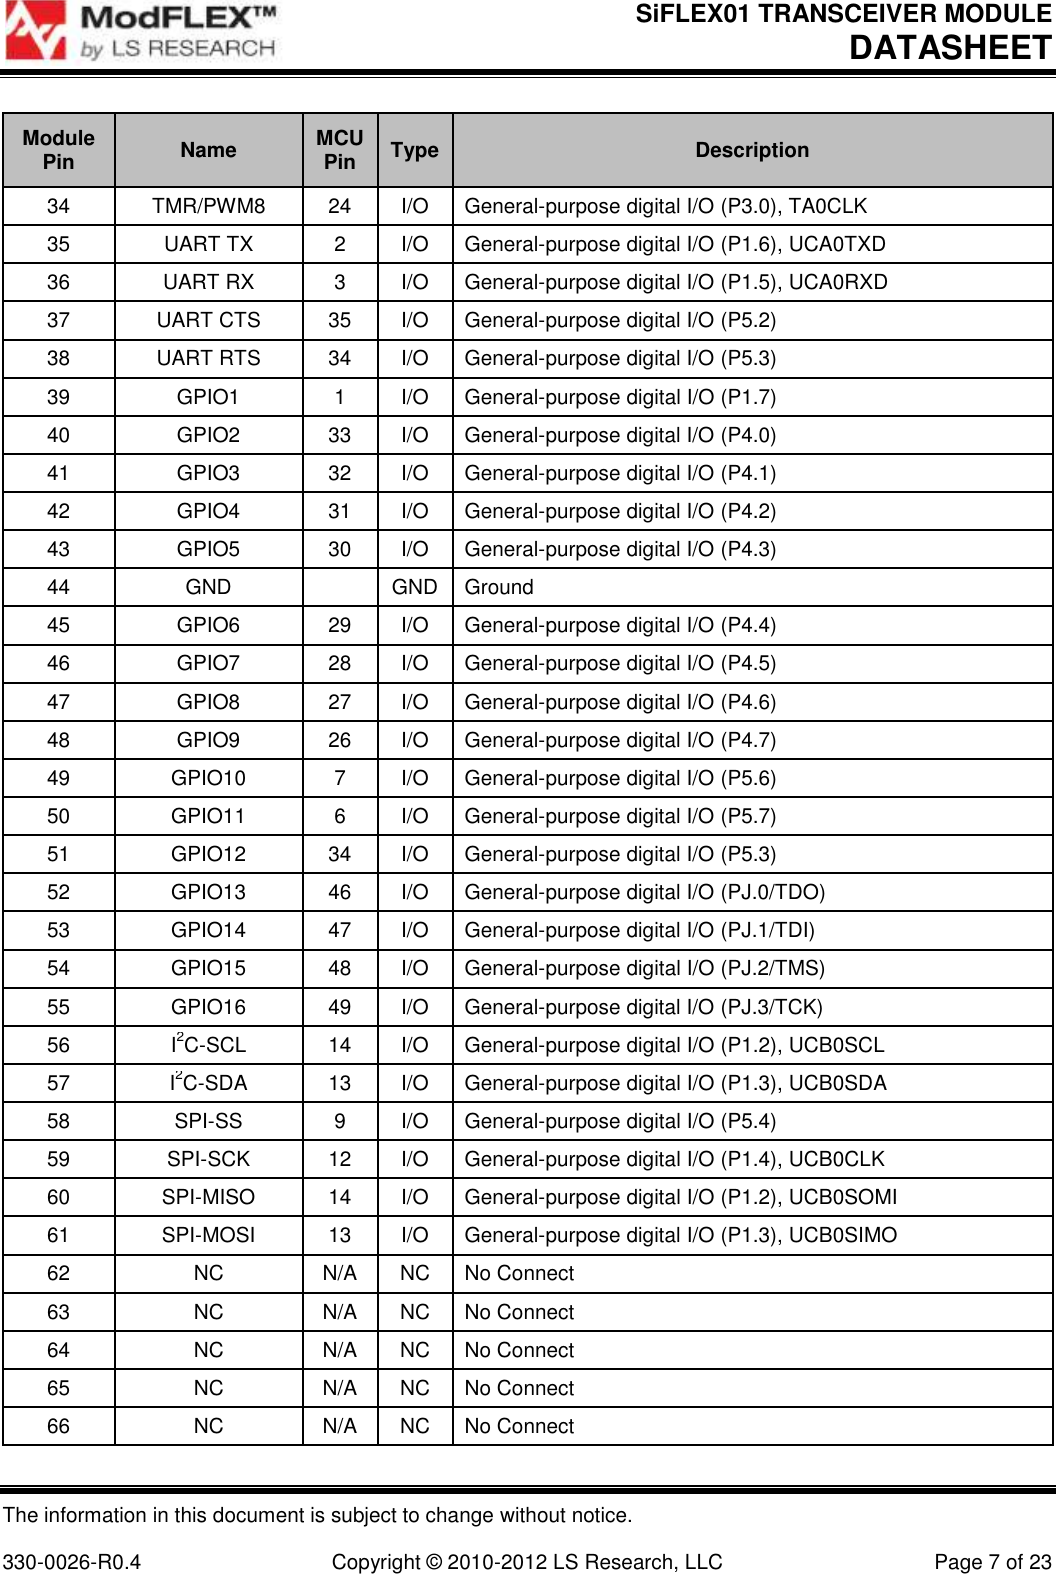 SiFLEX01 TRANSCEIVER MODULE DATASHEET The information in this document is subject to change without notice.  330-0026-R0.4  Copyright © 2010-2012 LS Research, LLC  Page 7 of 23 Module Pin Name MCU Pin Type Description 34 TMR/PWM8 24 I/O General-purpose digital I/O (P3.0), TA0CLK 35 UART TX 2 I/O General-purpose digital I/O (P1.6), UCA0TXD 36 UART RX 3 I/O General-purpose digital I/O (P1.5), UCA0RXD 37 UART CTS 35 I/O General-purpose digital I/O (P5.2) 38 UART RTS 34 I/O General-purpose digital I/O (P5.3) 39 GPIO1 1 I/O General-purpose digital I/O (P1.7) 40 GPIO2 33 I/O General-purpose digital I/O (P4.0) 41 GPIO3 32 I/O General-purpose digital I/O (P4.1) 42 GPIO4 31 I/O General-purpose digital I/O (P4.2) 43 GPIO5 30 I/O General-purpose digital I/O (P4.3) 44 GND  GND Ground 45 GPIO6 29 I/O General-purpose digital I/O (P4.4) 46 GPIO7 28 I/O General-purpose digital I/O (P4.5) 47 GPIO8 27 I/O General-purpose digital I/O (P4.6) 48 GPIO9 26 I/O General-purpose digital I/O (P4.7) 49 GPIO10 7 I/O General-purpose digital I/O (P5.6) 50 GPIO11 6 I/O General-purpose digital I/O (P5.7) 51 GPIO12 34 I/O General-purpose digital I/O (P5.3) 52 GPIO13 46 I/O General-purpose digital I/O (PJ.0/TDO) 53 GPIO14 47 I/O General-purpose digital I/O (PJ.1/TDI) 54 GPIO15 48 I/O General-purpose digital I/O (PJ.2/TMS) 55 GPIO16 49 I/O General-purpose digital I/O (PJ.3/TCK) 56 I2C-SCL 14 I/O General-purpose digital I/O (P1.2), UCB0SCL 57 I2C-SDA 13 I/O General-purpose digital I/O (P1.3), UCB0SDA 58 SPI-SS 9 I/O General-purpose digital I/O (P5.4) 59 SPI-SCK 12 I/O General-purpose digital I/O (P1.4), UCB0CLK 60 SPI-MISO 14 I/O General-purpose digital I/O (P1.2), UCB0SOMI 61 SPI-MOSI 13 I/O General-purpose digital I/O (P1.3), UCB0SIMO 62 NC N/A NC No Connect 63 NC N/A NC No Connect 64 NC N/A NC No Connect 65 NC N/A NC No Connect 66 NC N/A NC No Connect 